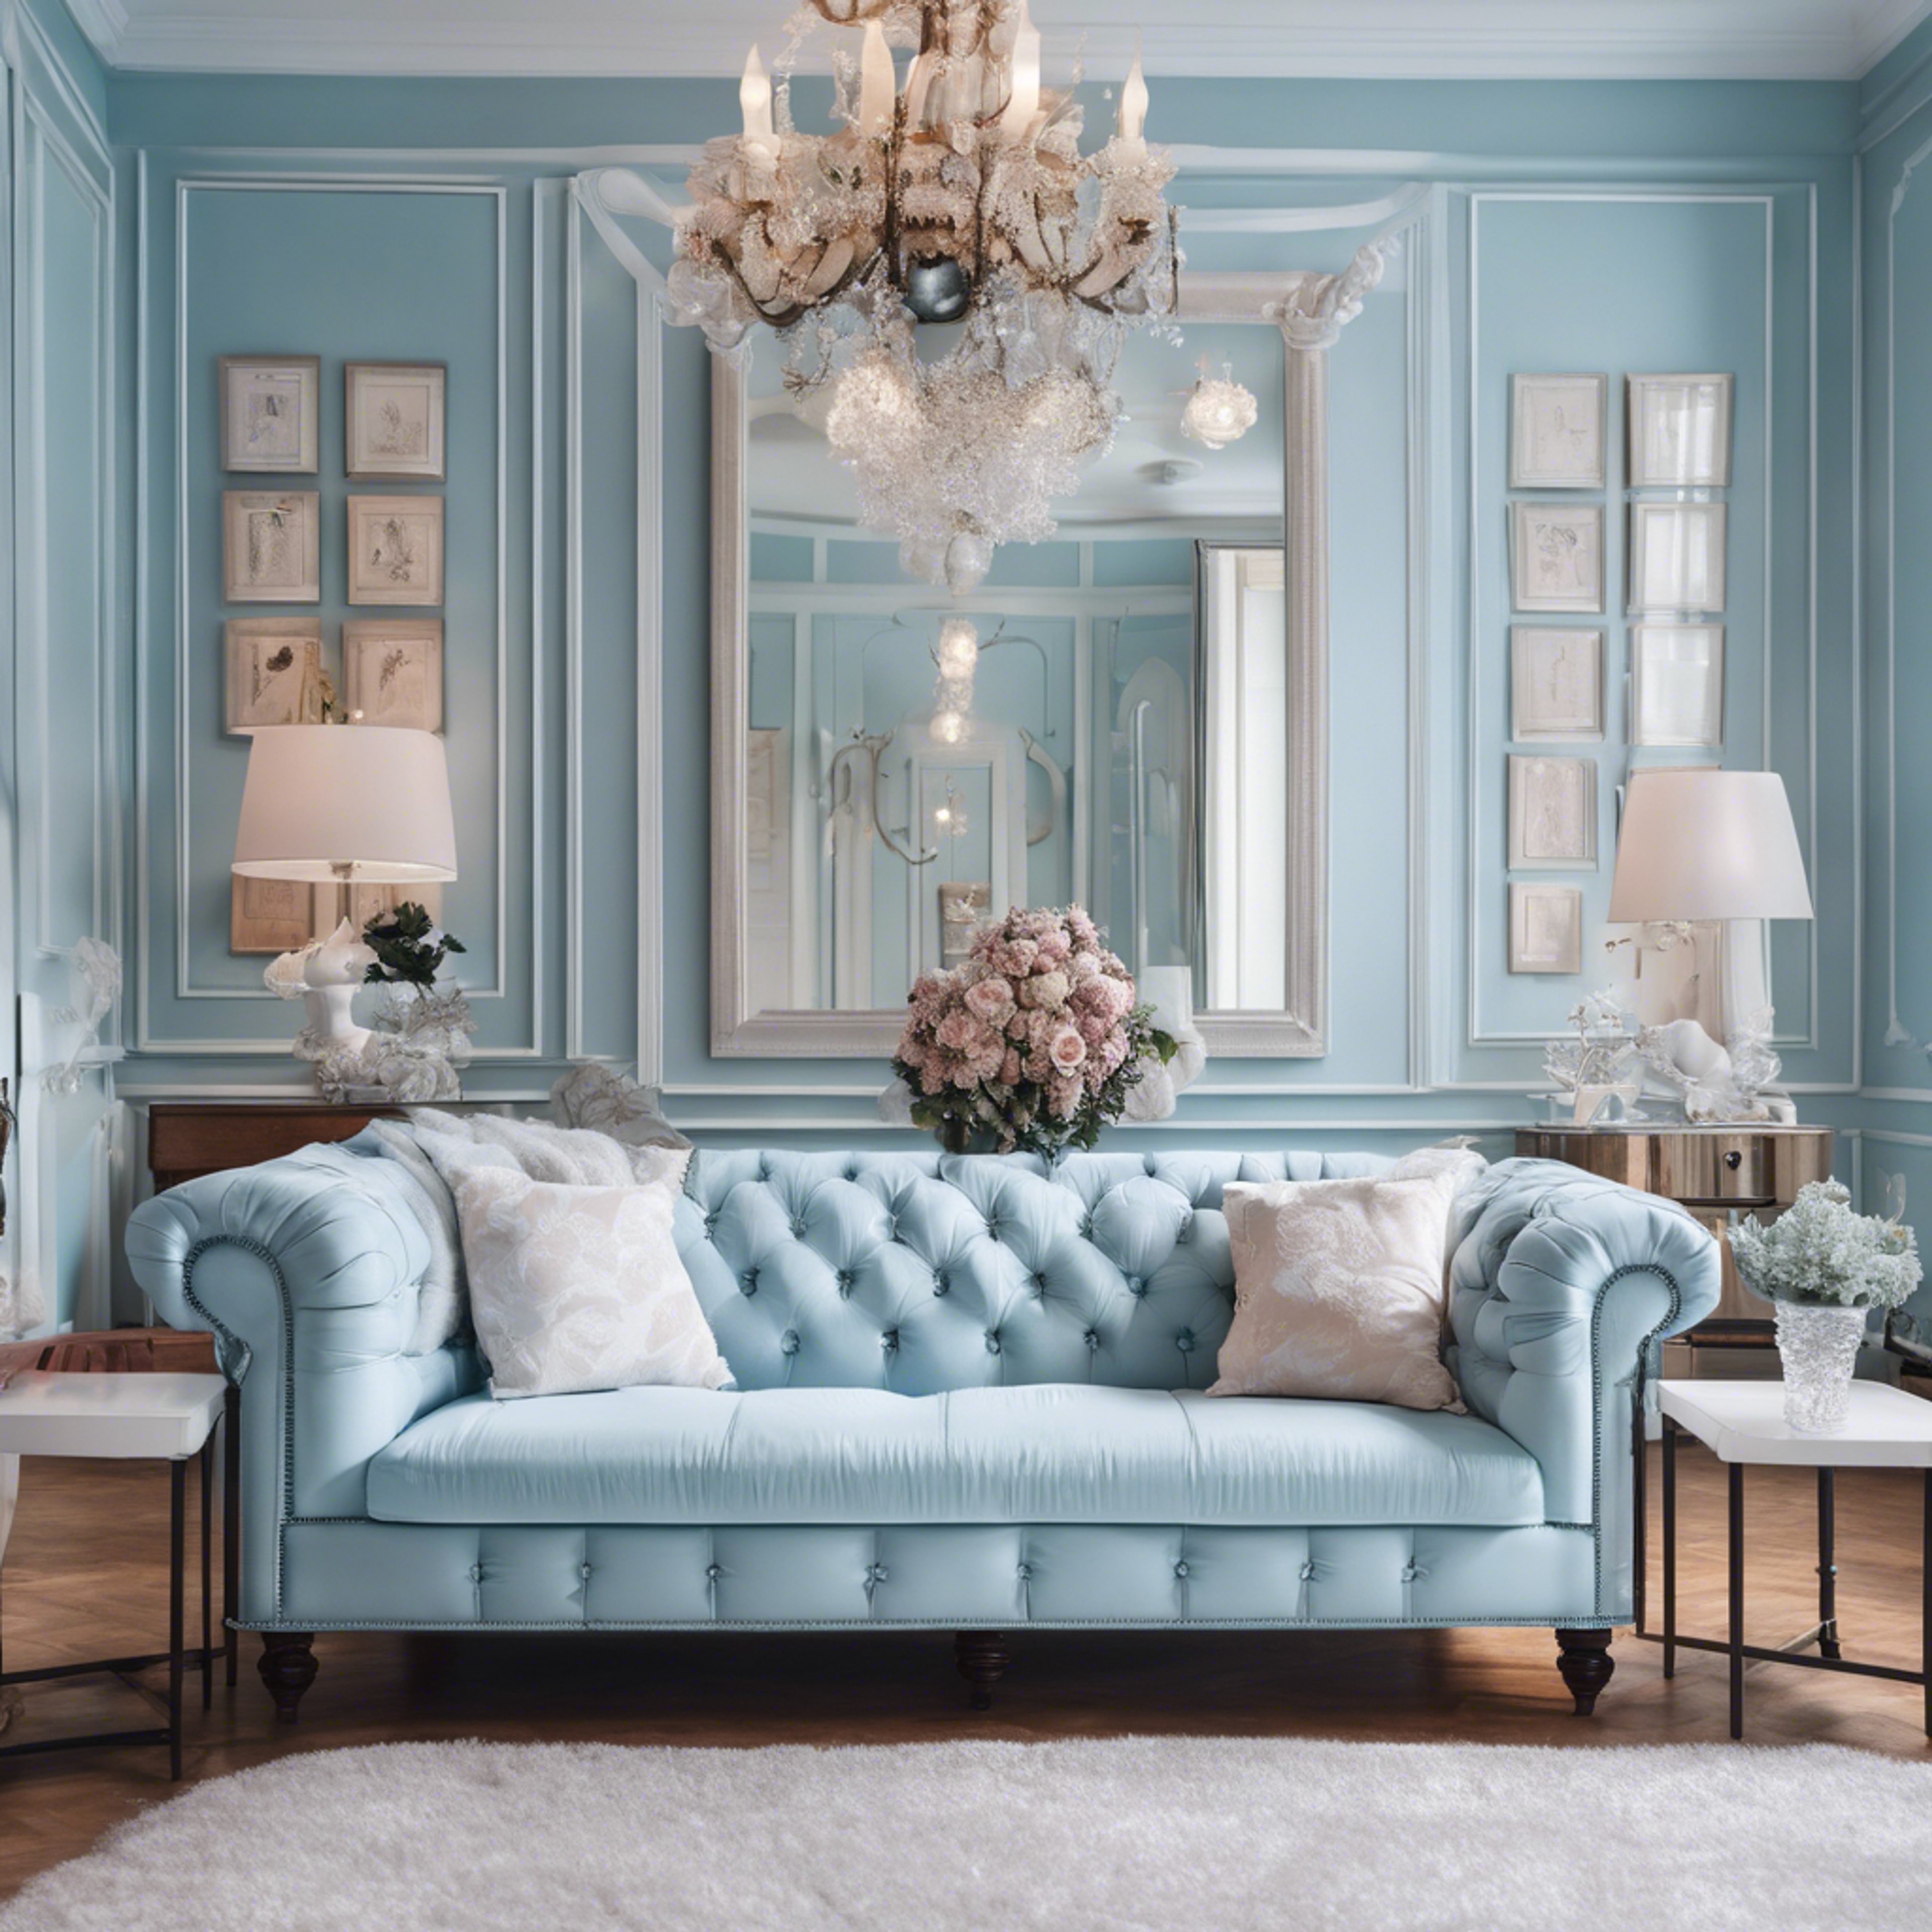 A preppy styled room with pastel blue wallpaper, Chesterfield sofa, and white French style furniture.” Sfondo[3904fac215ba4f1eaa62]